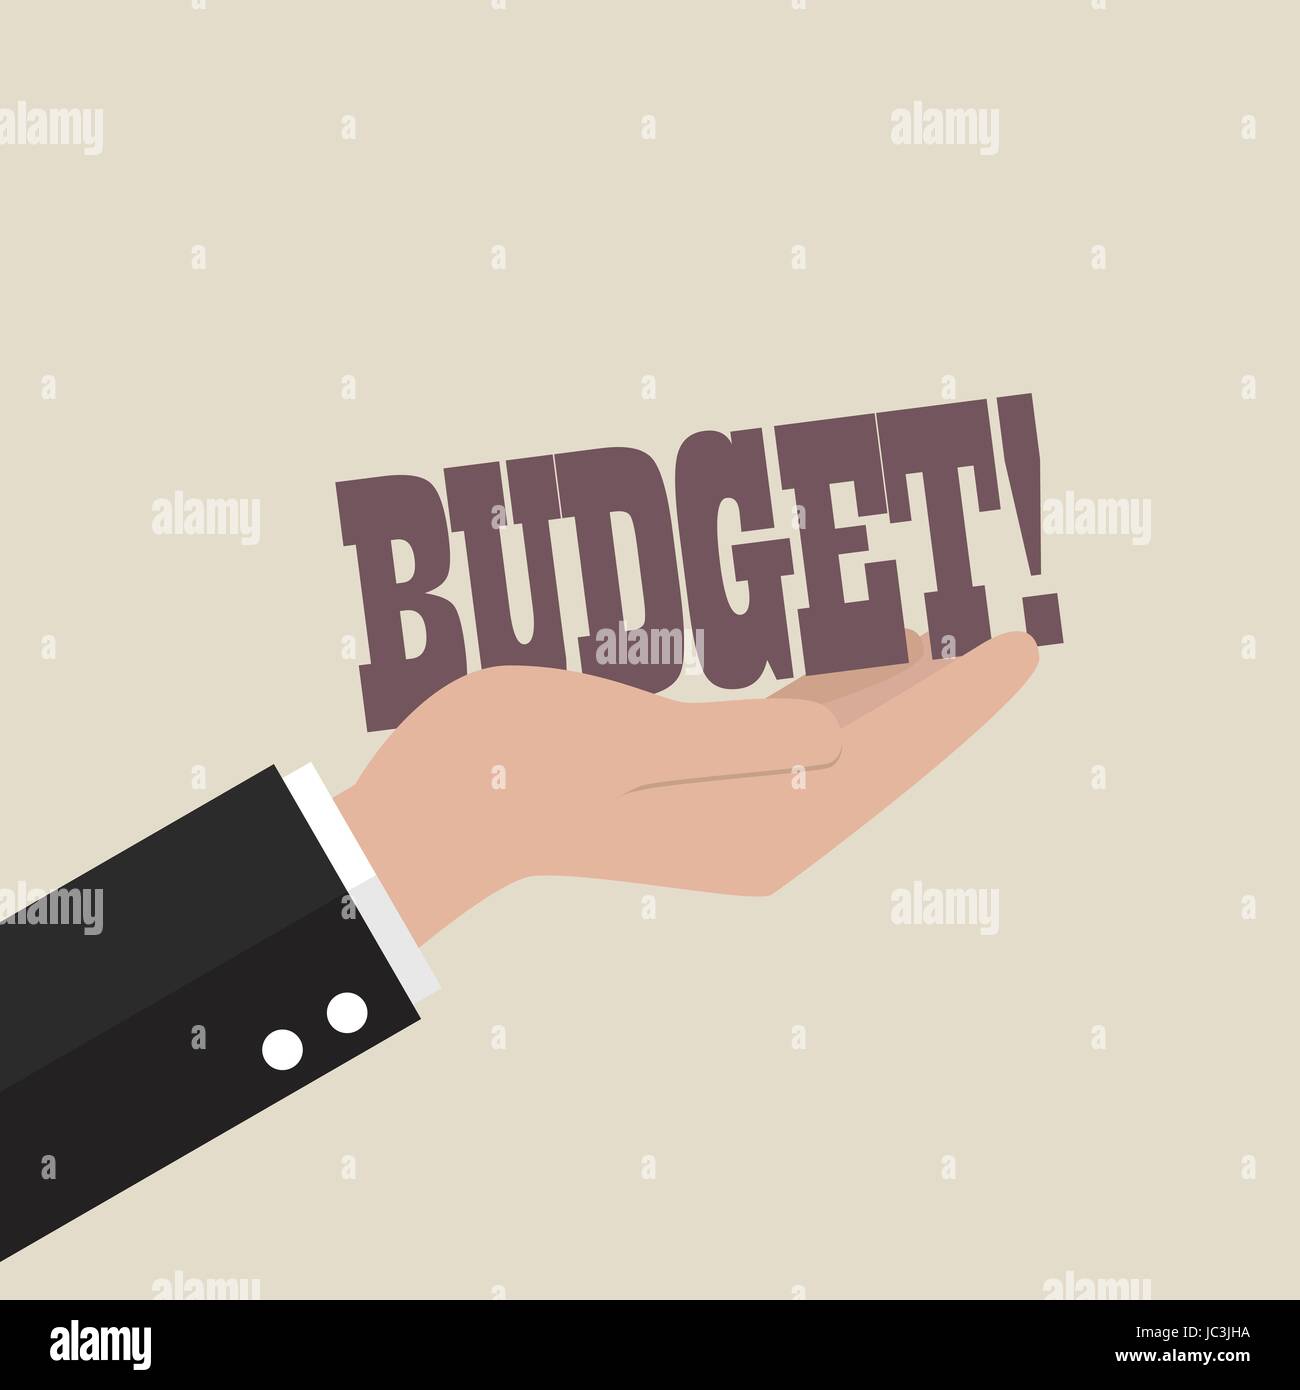 Big hand holding budget word. Business concept Stock Vector